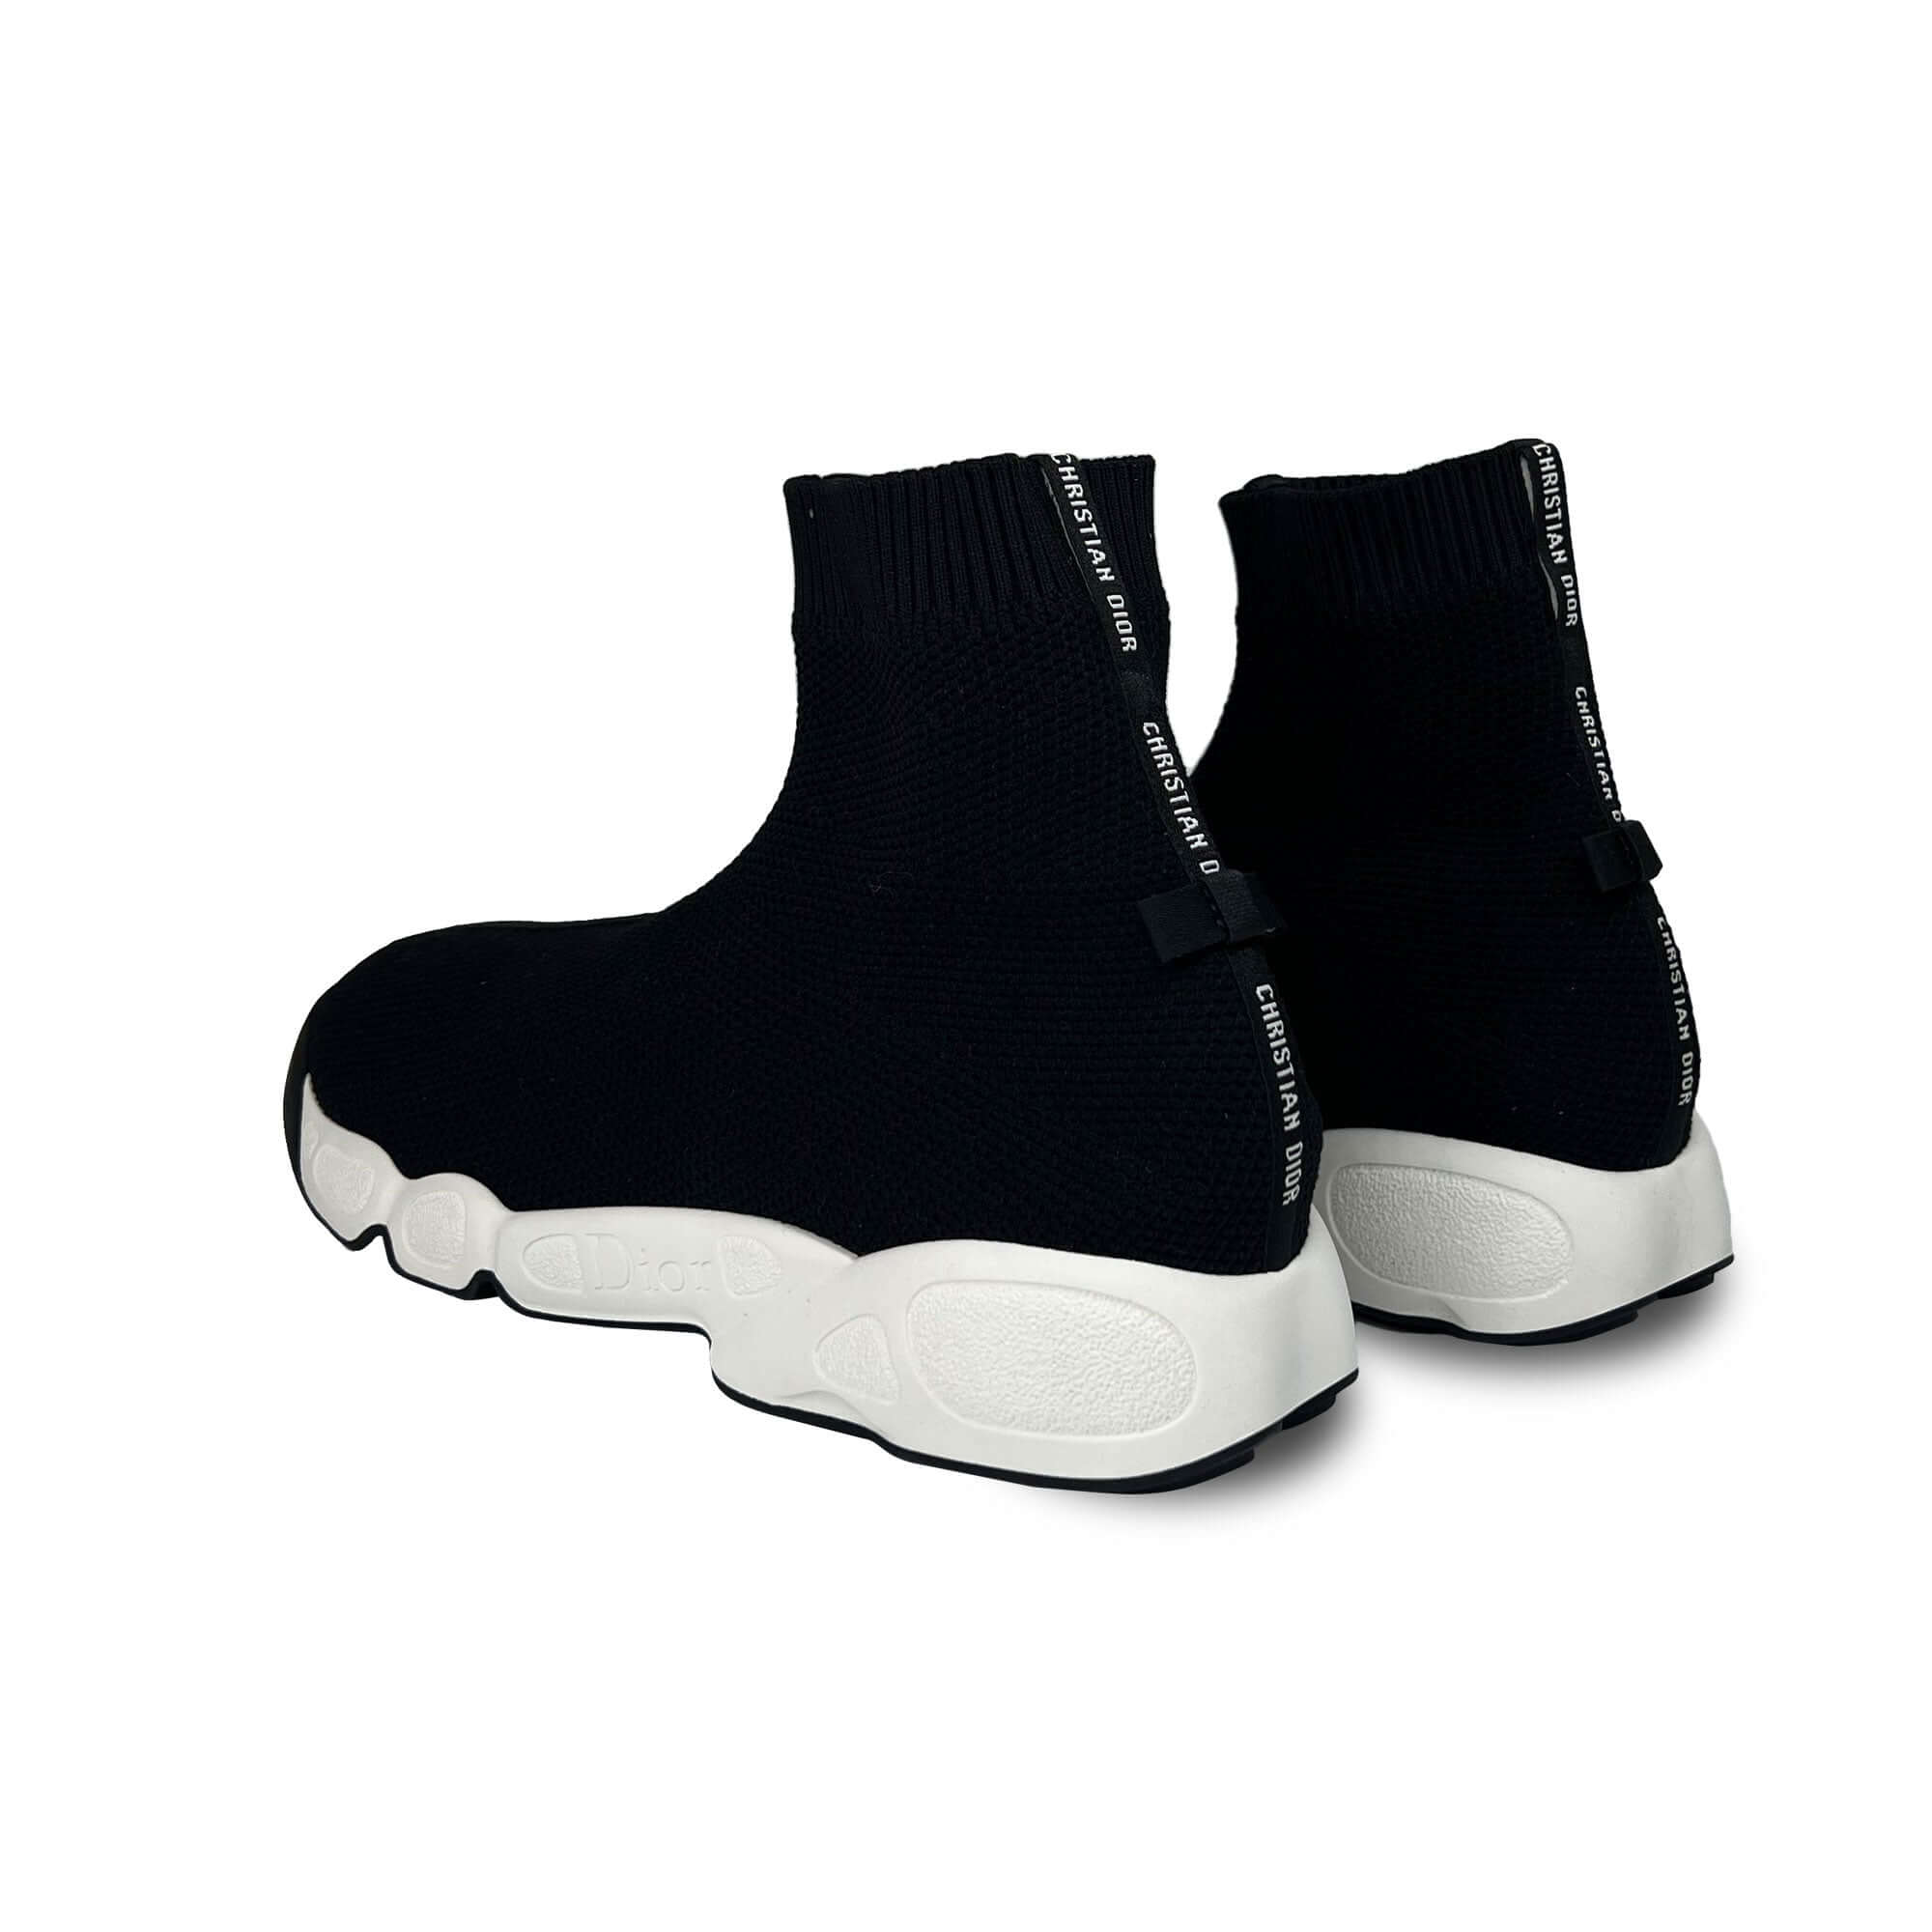 Christian Dior fusion 2.0 high top sock sneakers